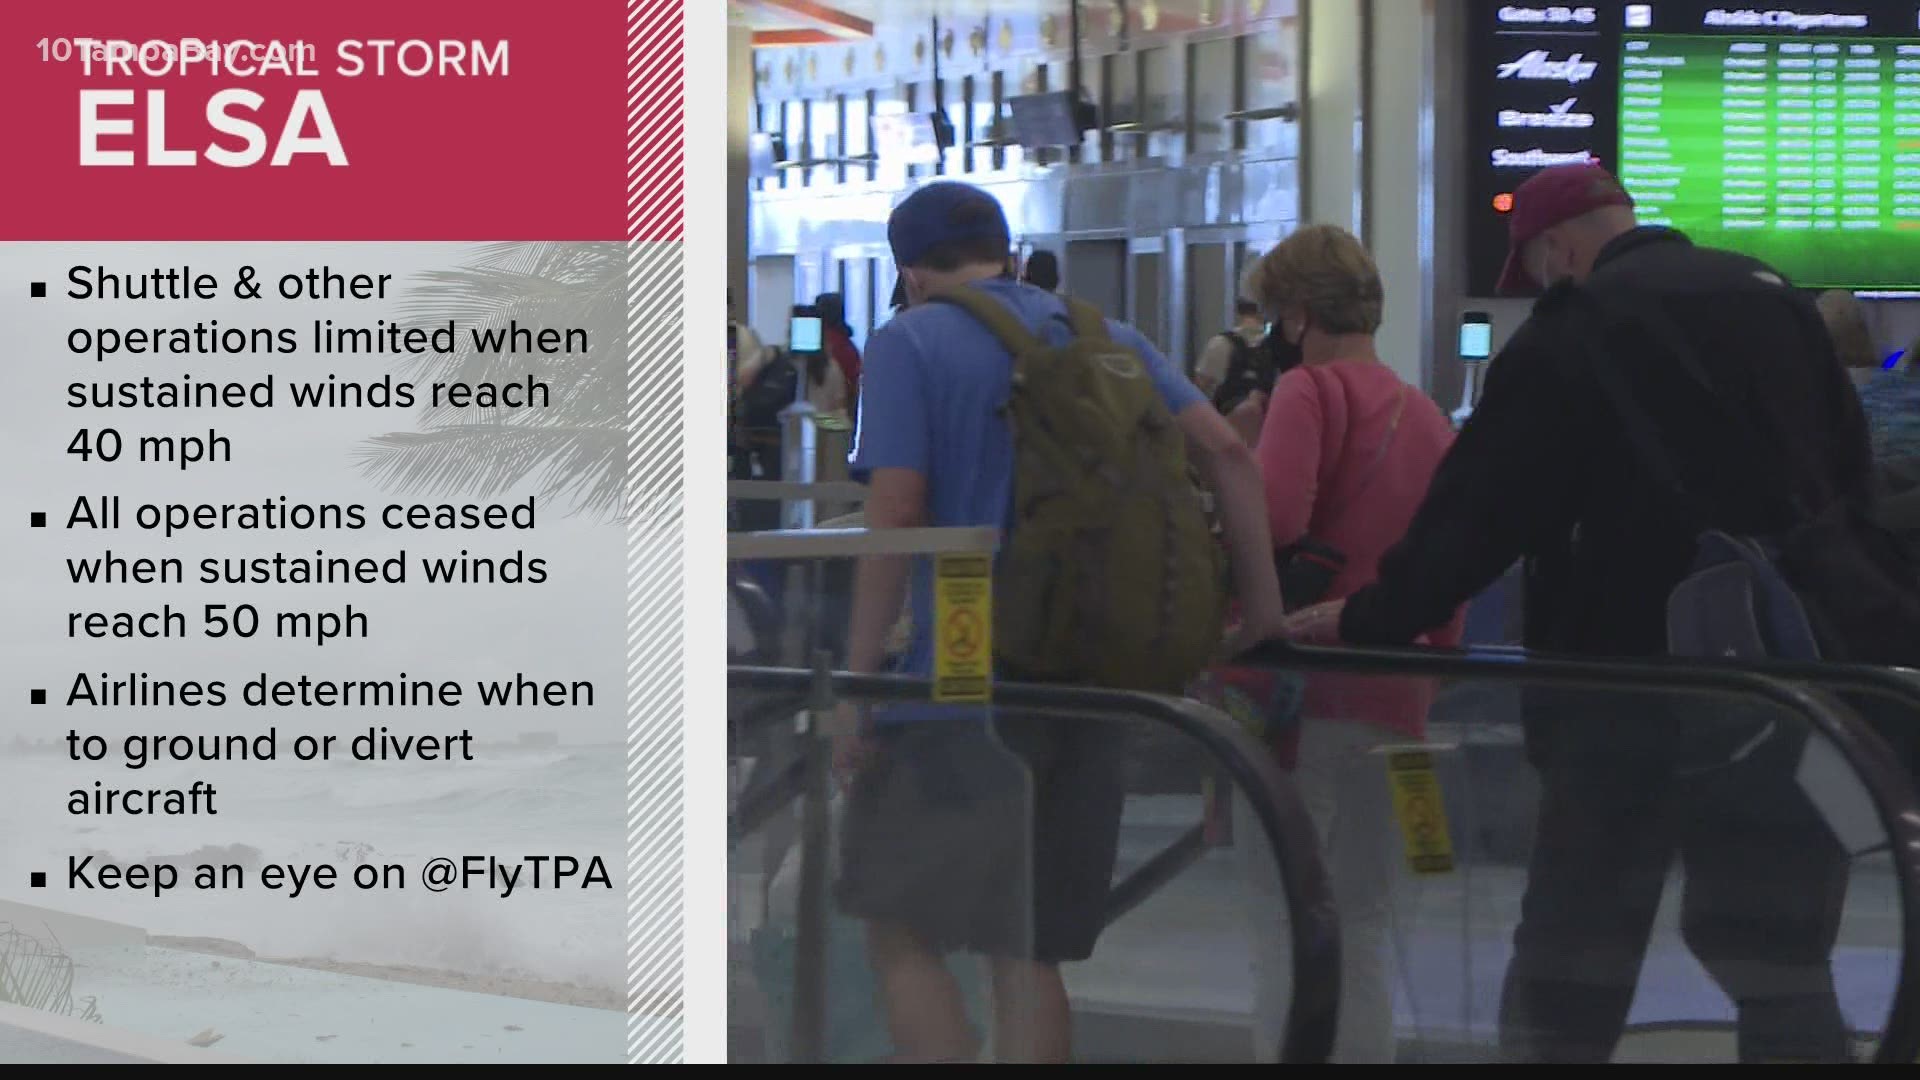 Tampa International Airport plans to suspend some operations as wind speeds increase.